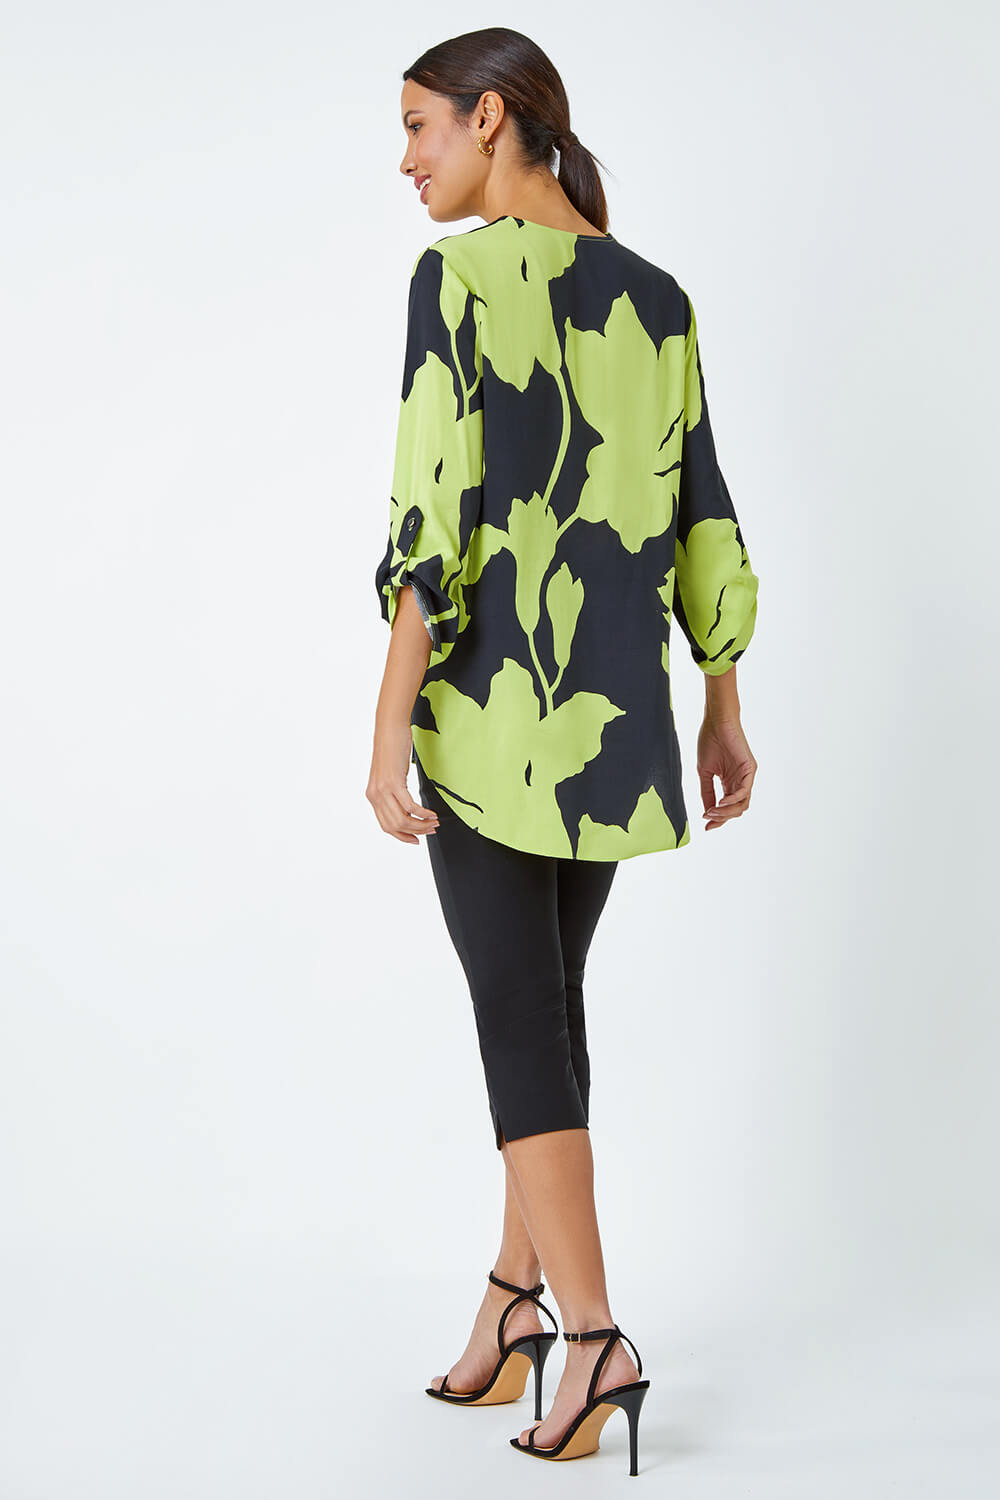 Green Bold Floral Print Pleat Front Top, Image 3 of 5